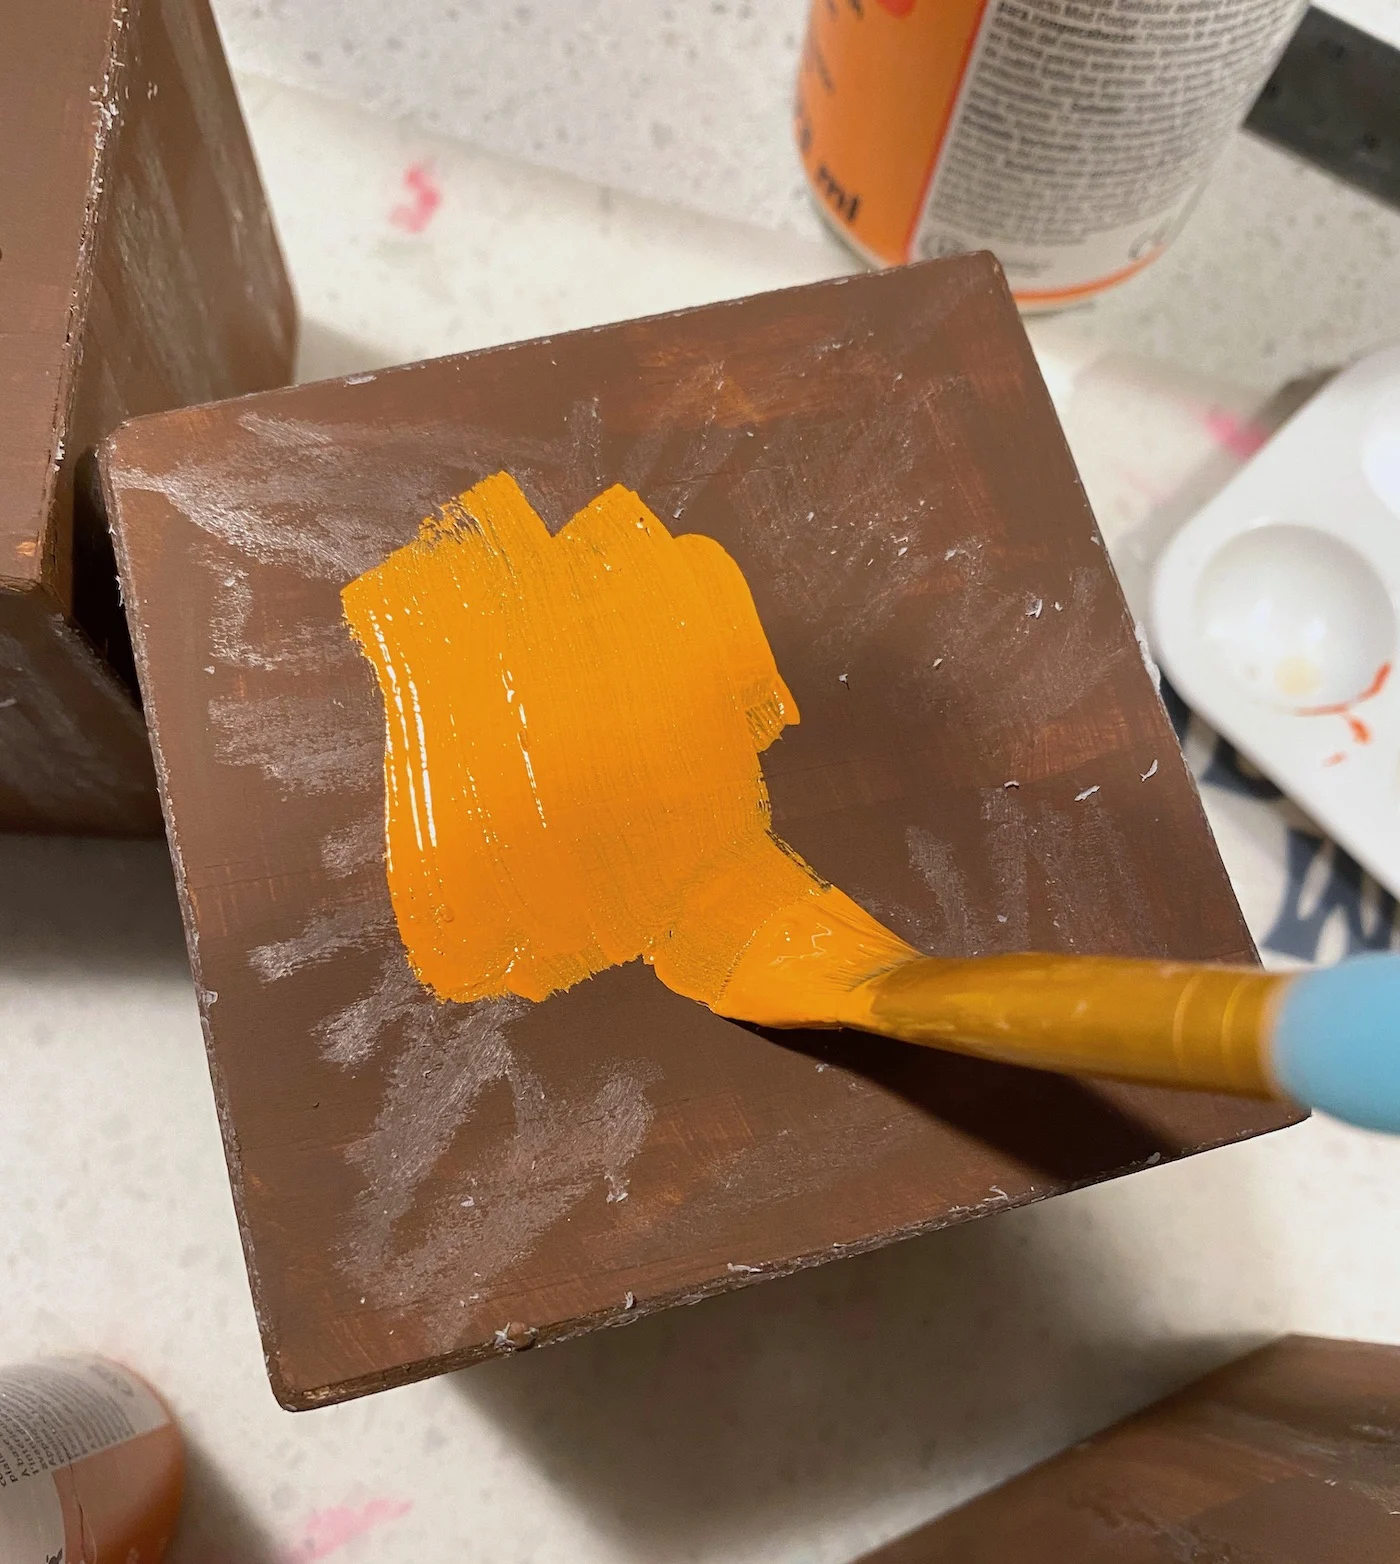 Painting over the brown with orange paint